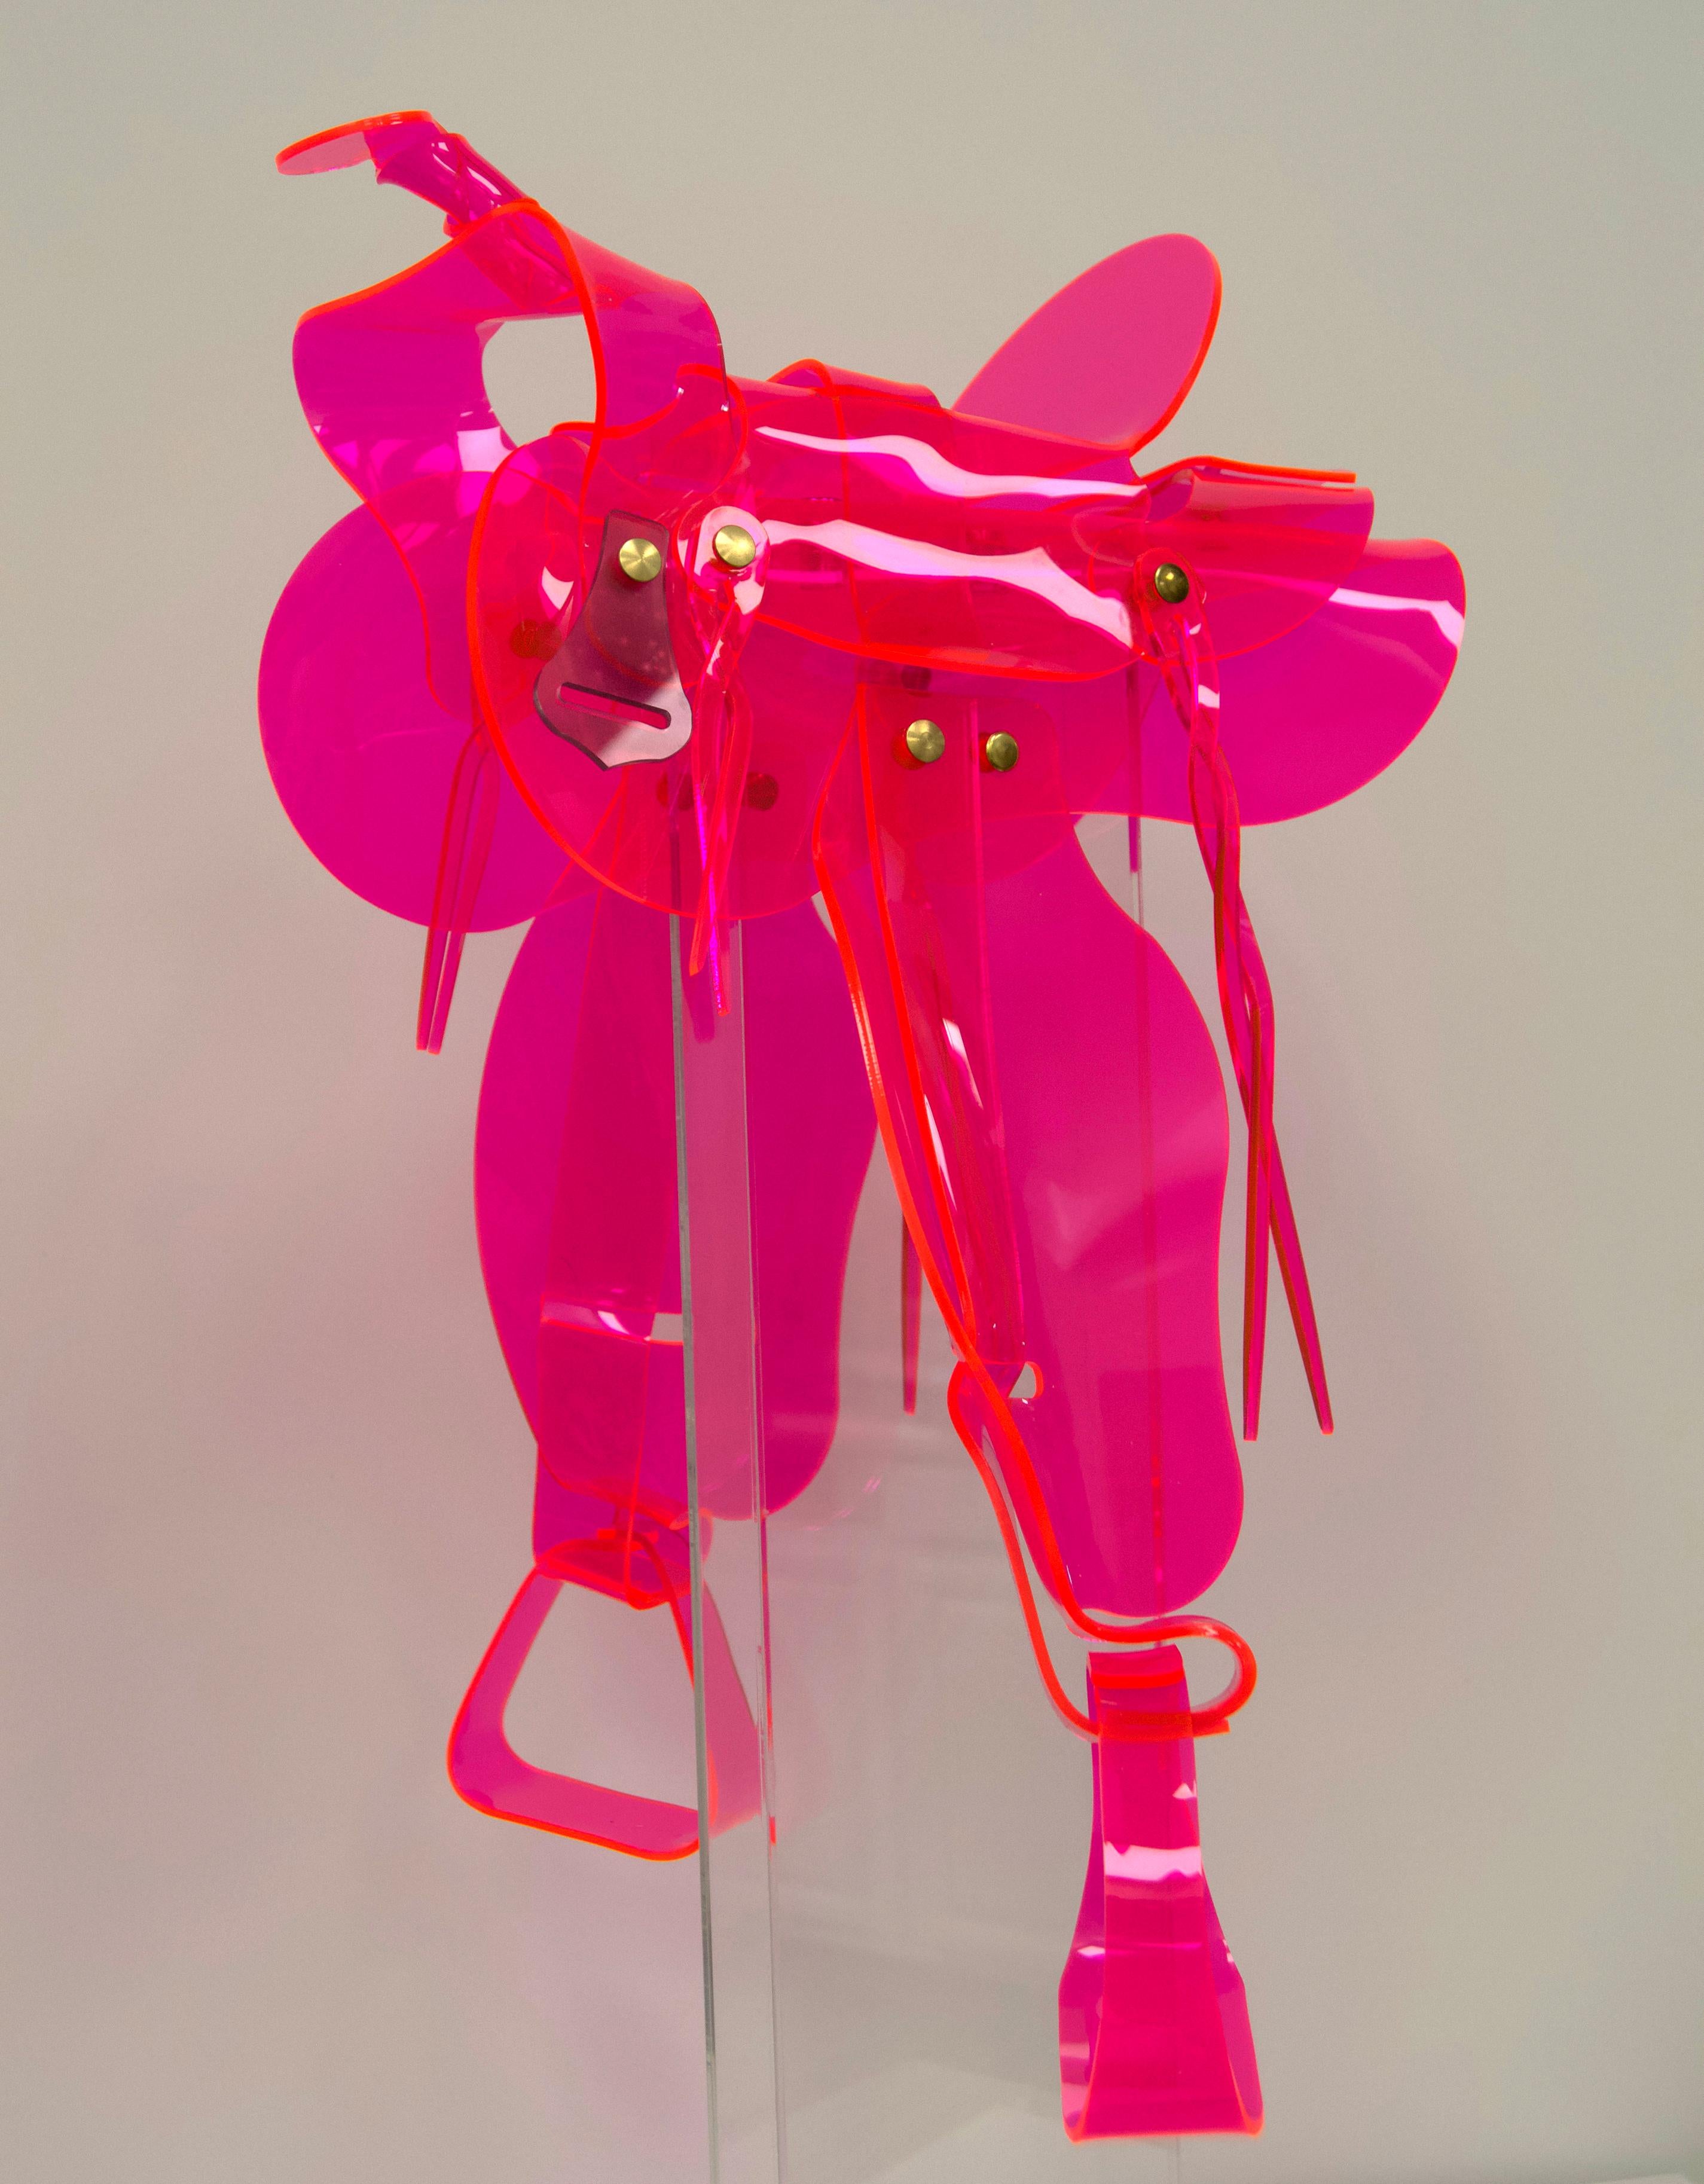 Maeve Eichelberger Figurative Sculpture - "Hot Mess" -  fluorescent acrylic  hand formed 